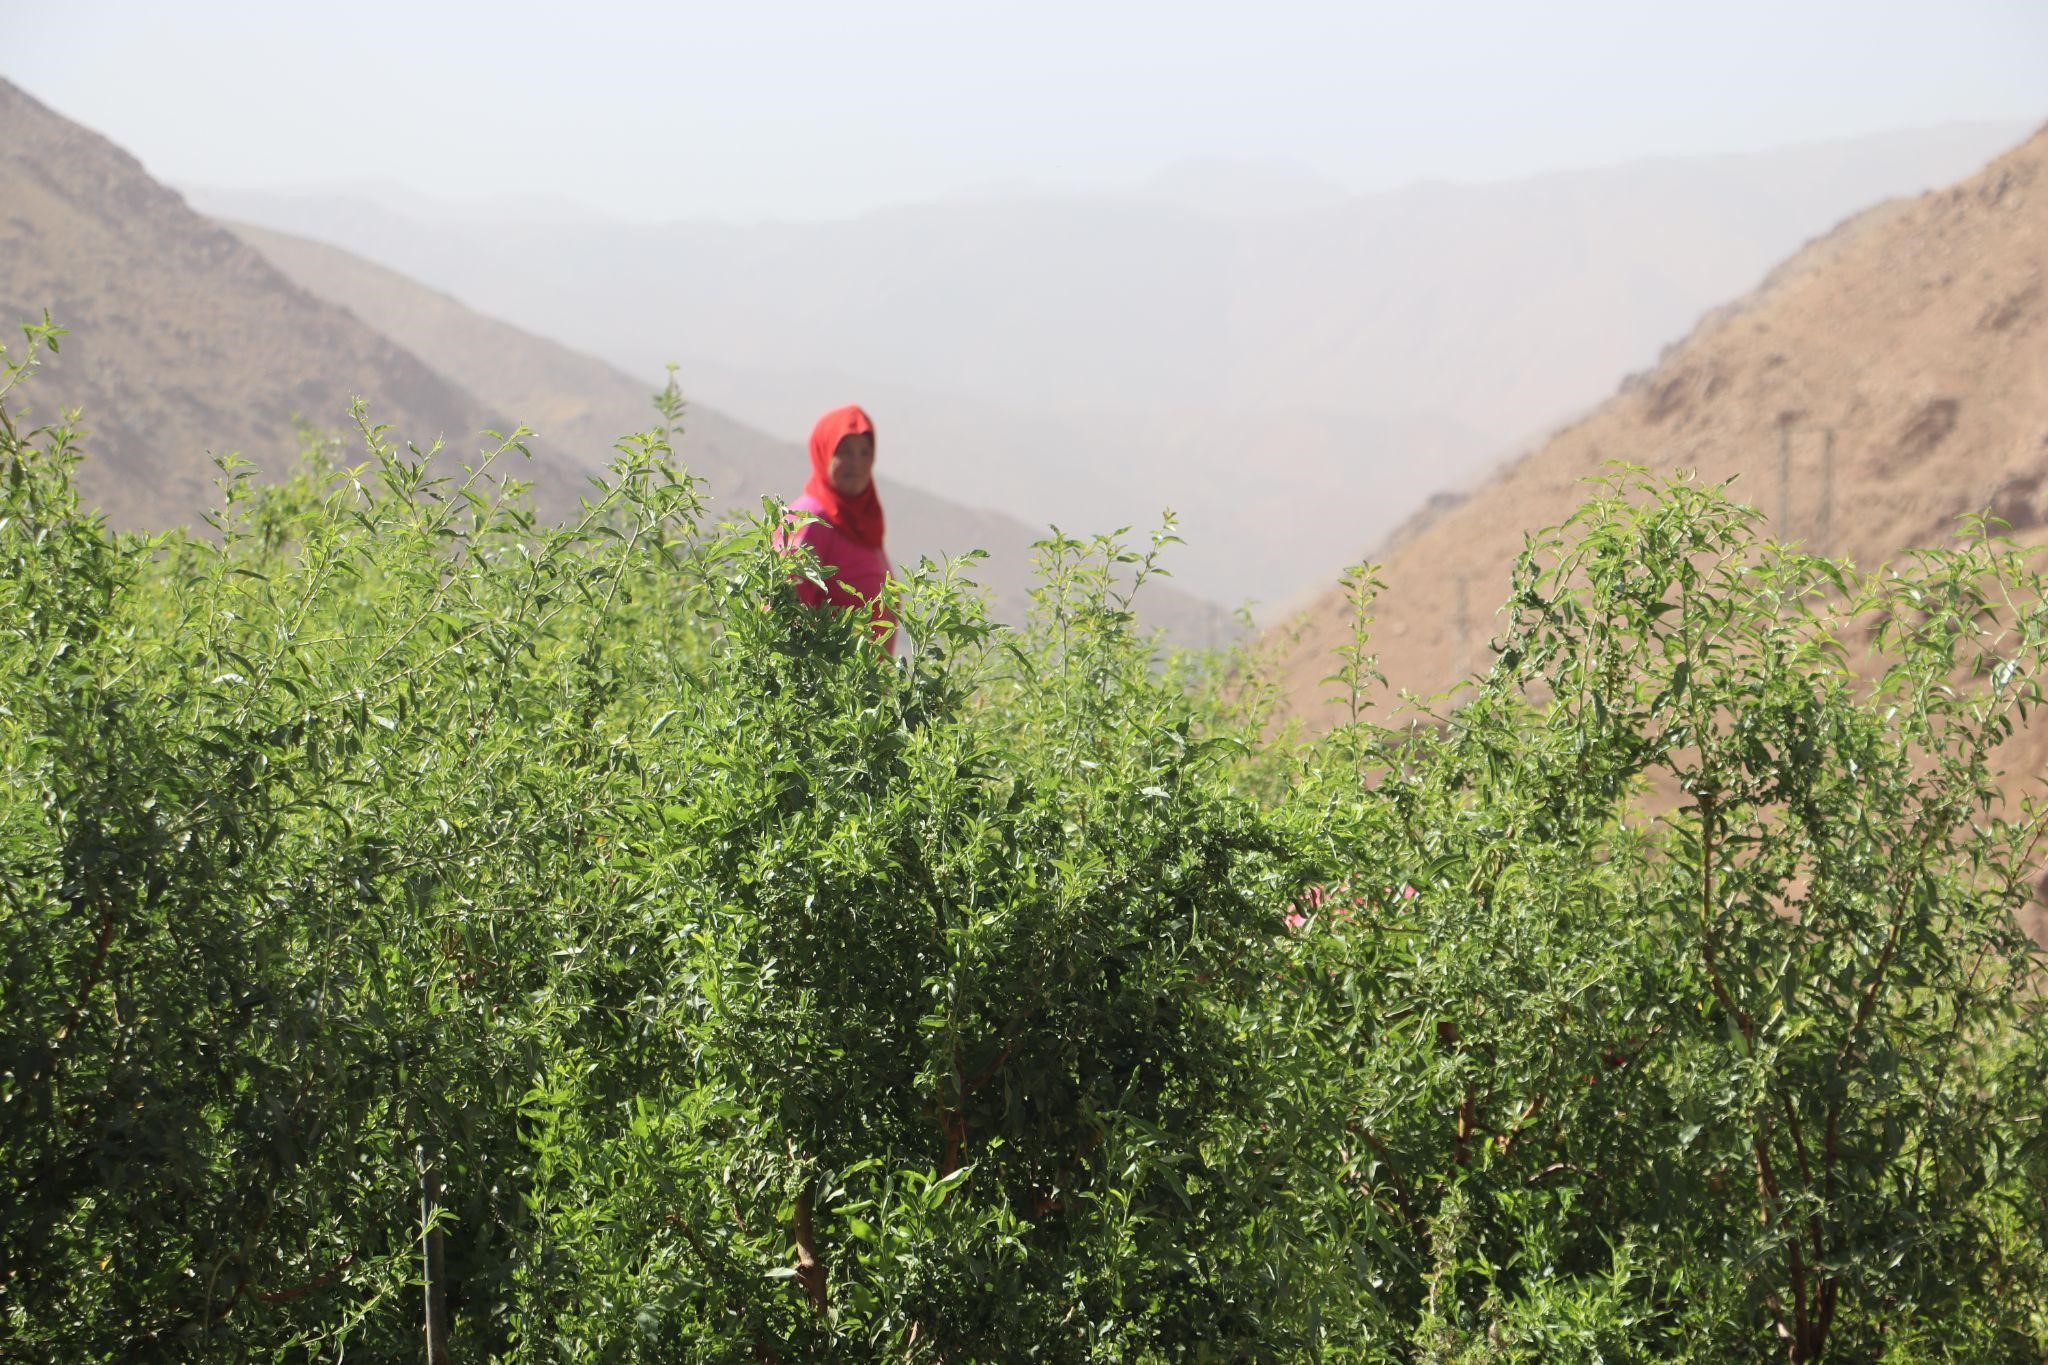 The organic fruit tree nursery managed by the members of the Aguerzrane women’s cooperative in the Toubkal municipality of Morocco (Katie Bercegeay, HAF, 2021)